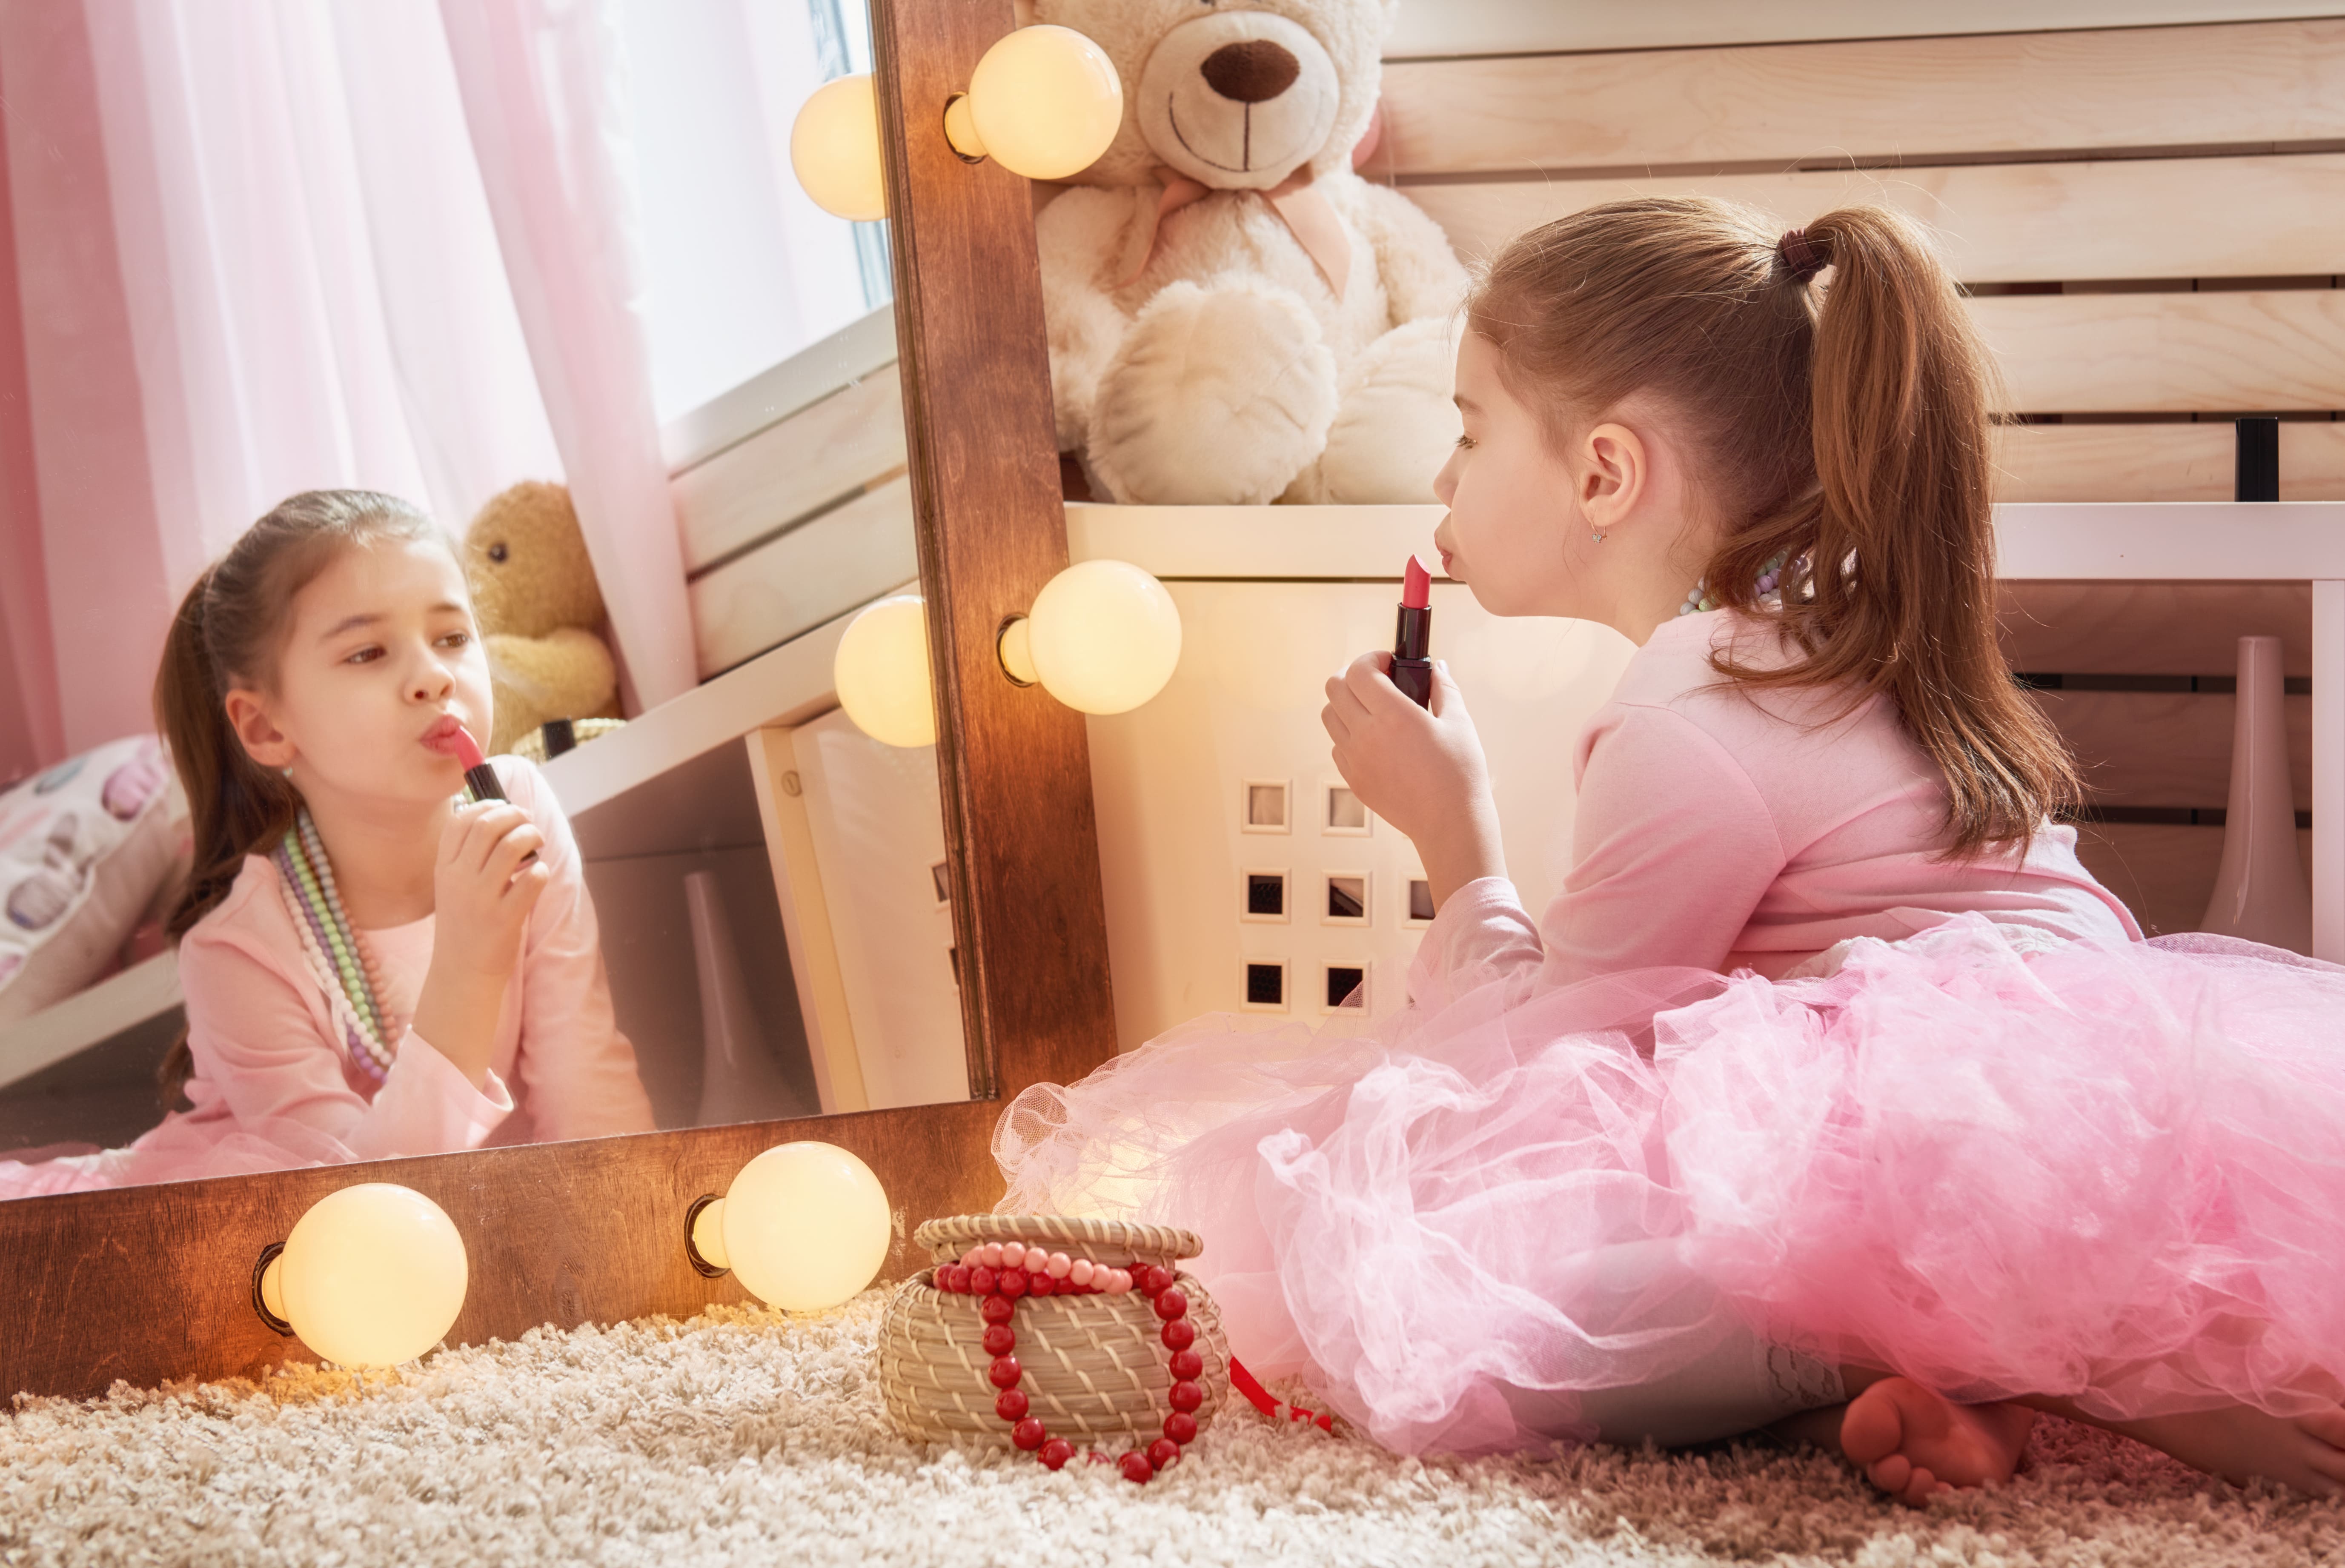 Young girl in a pink tutu with beaded necklace on, sitting on the floor, looking in the mirror while she puts on lipstick